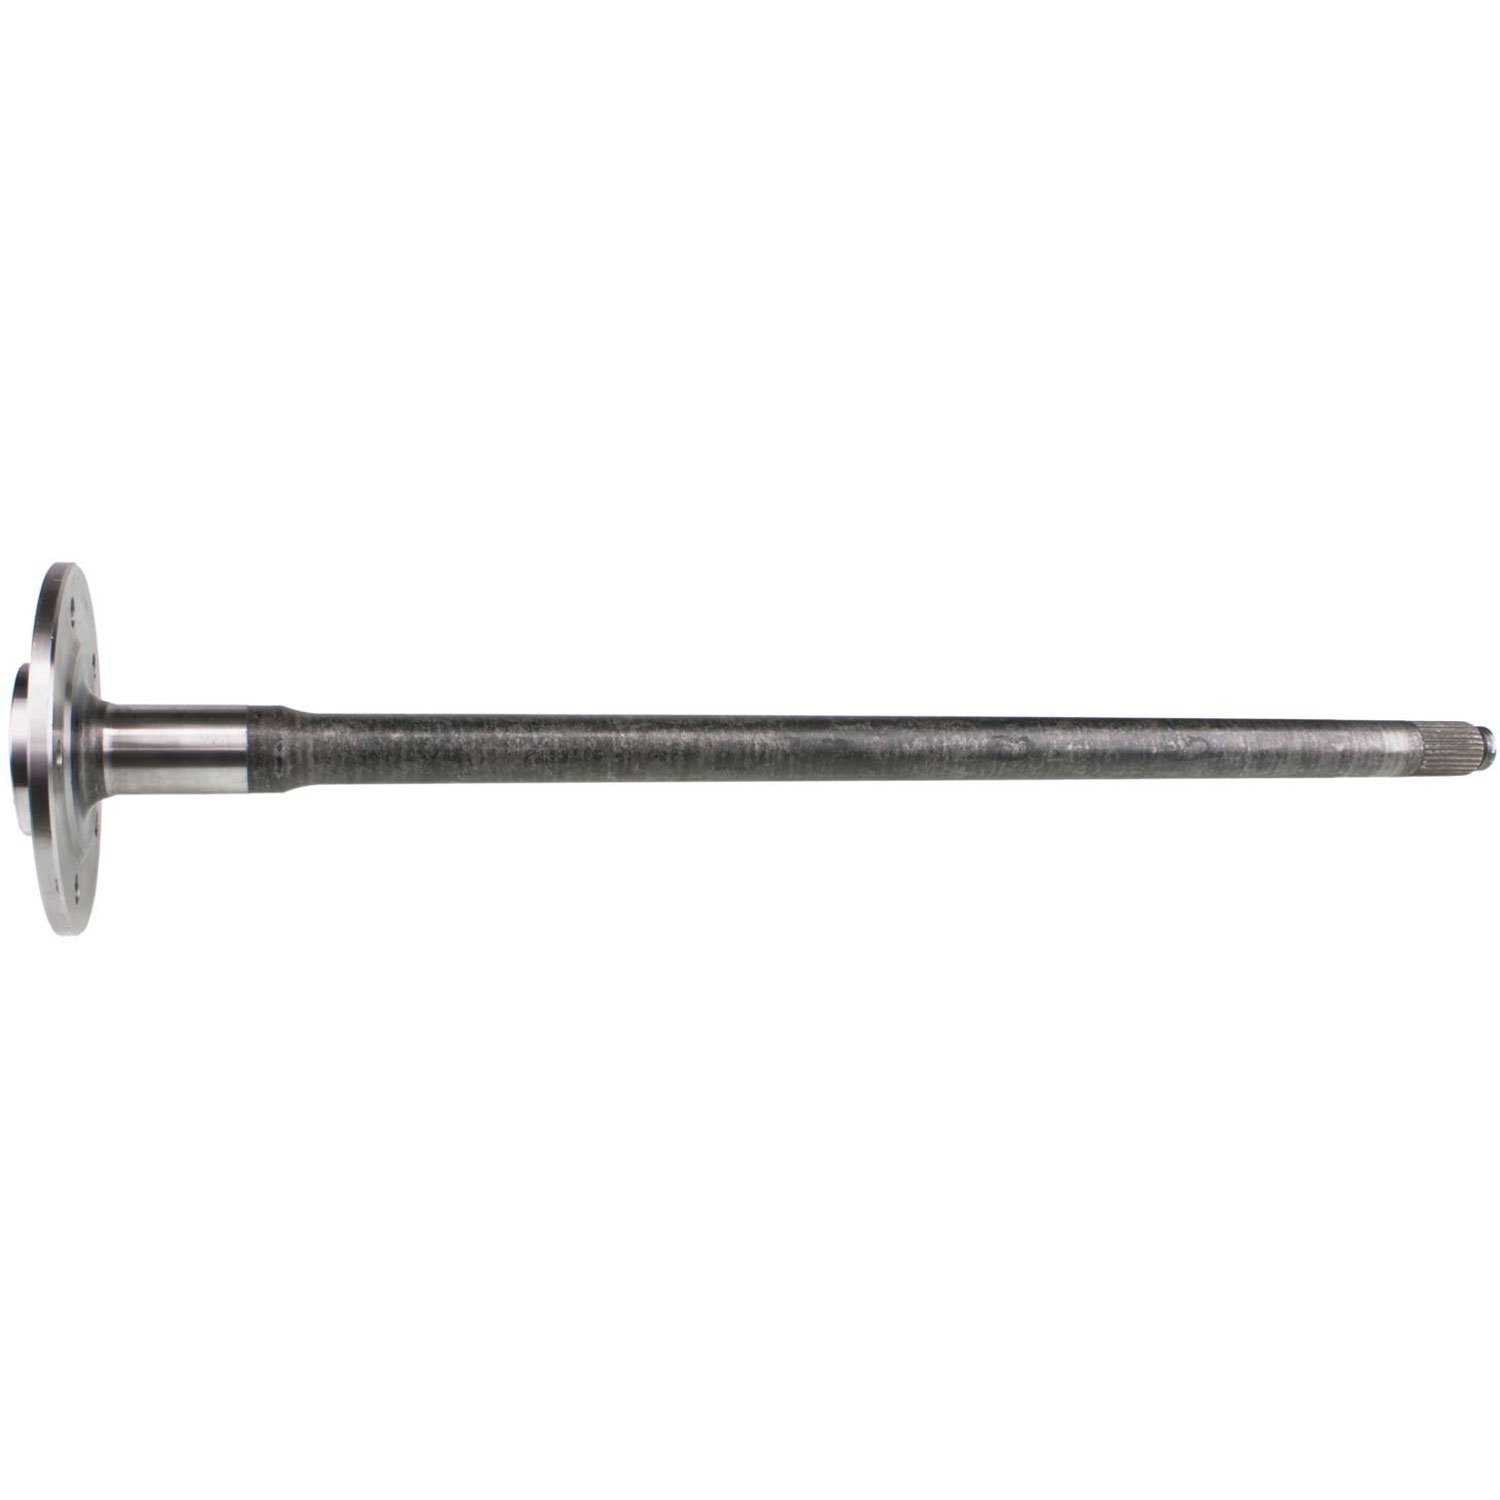 Replacement Axle Shaft 1541 Manganese for GM Trucks,